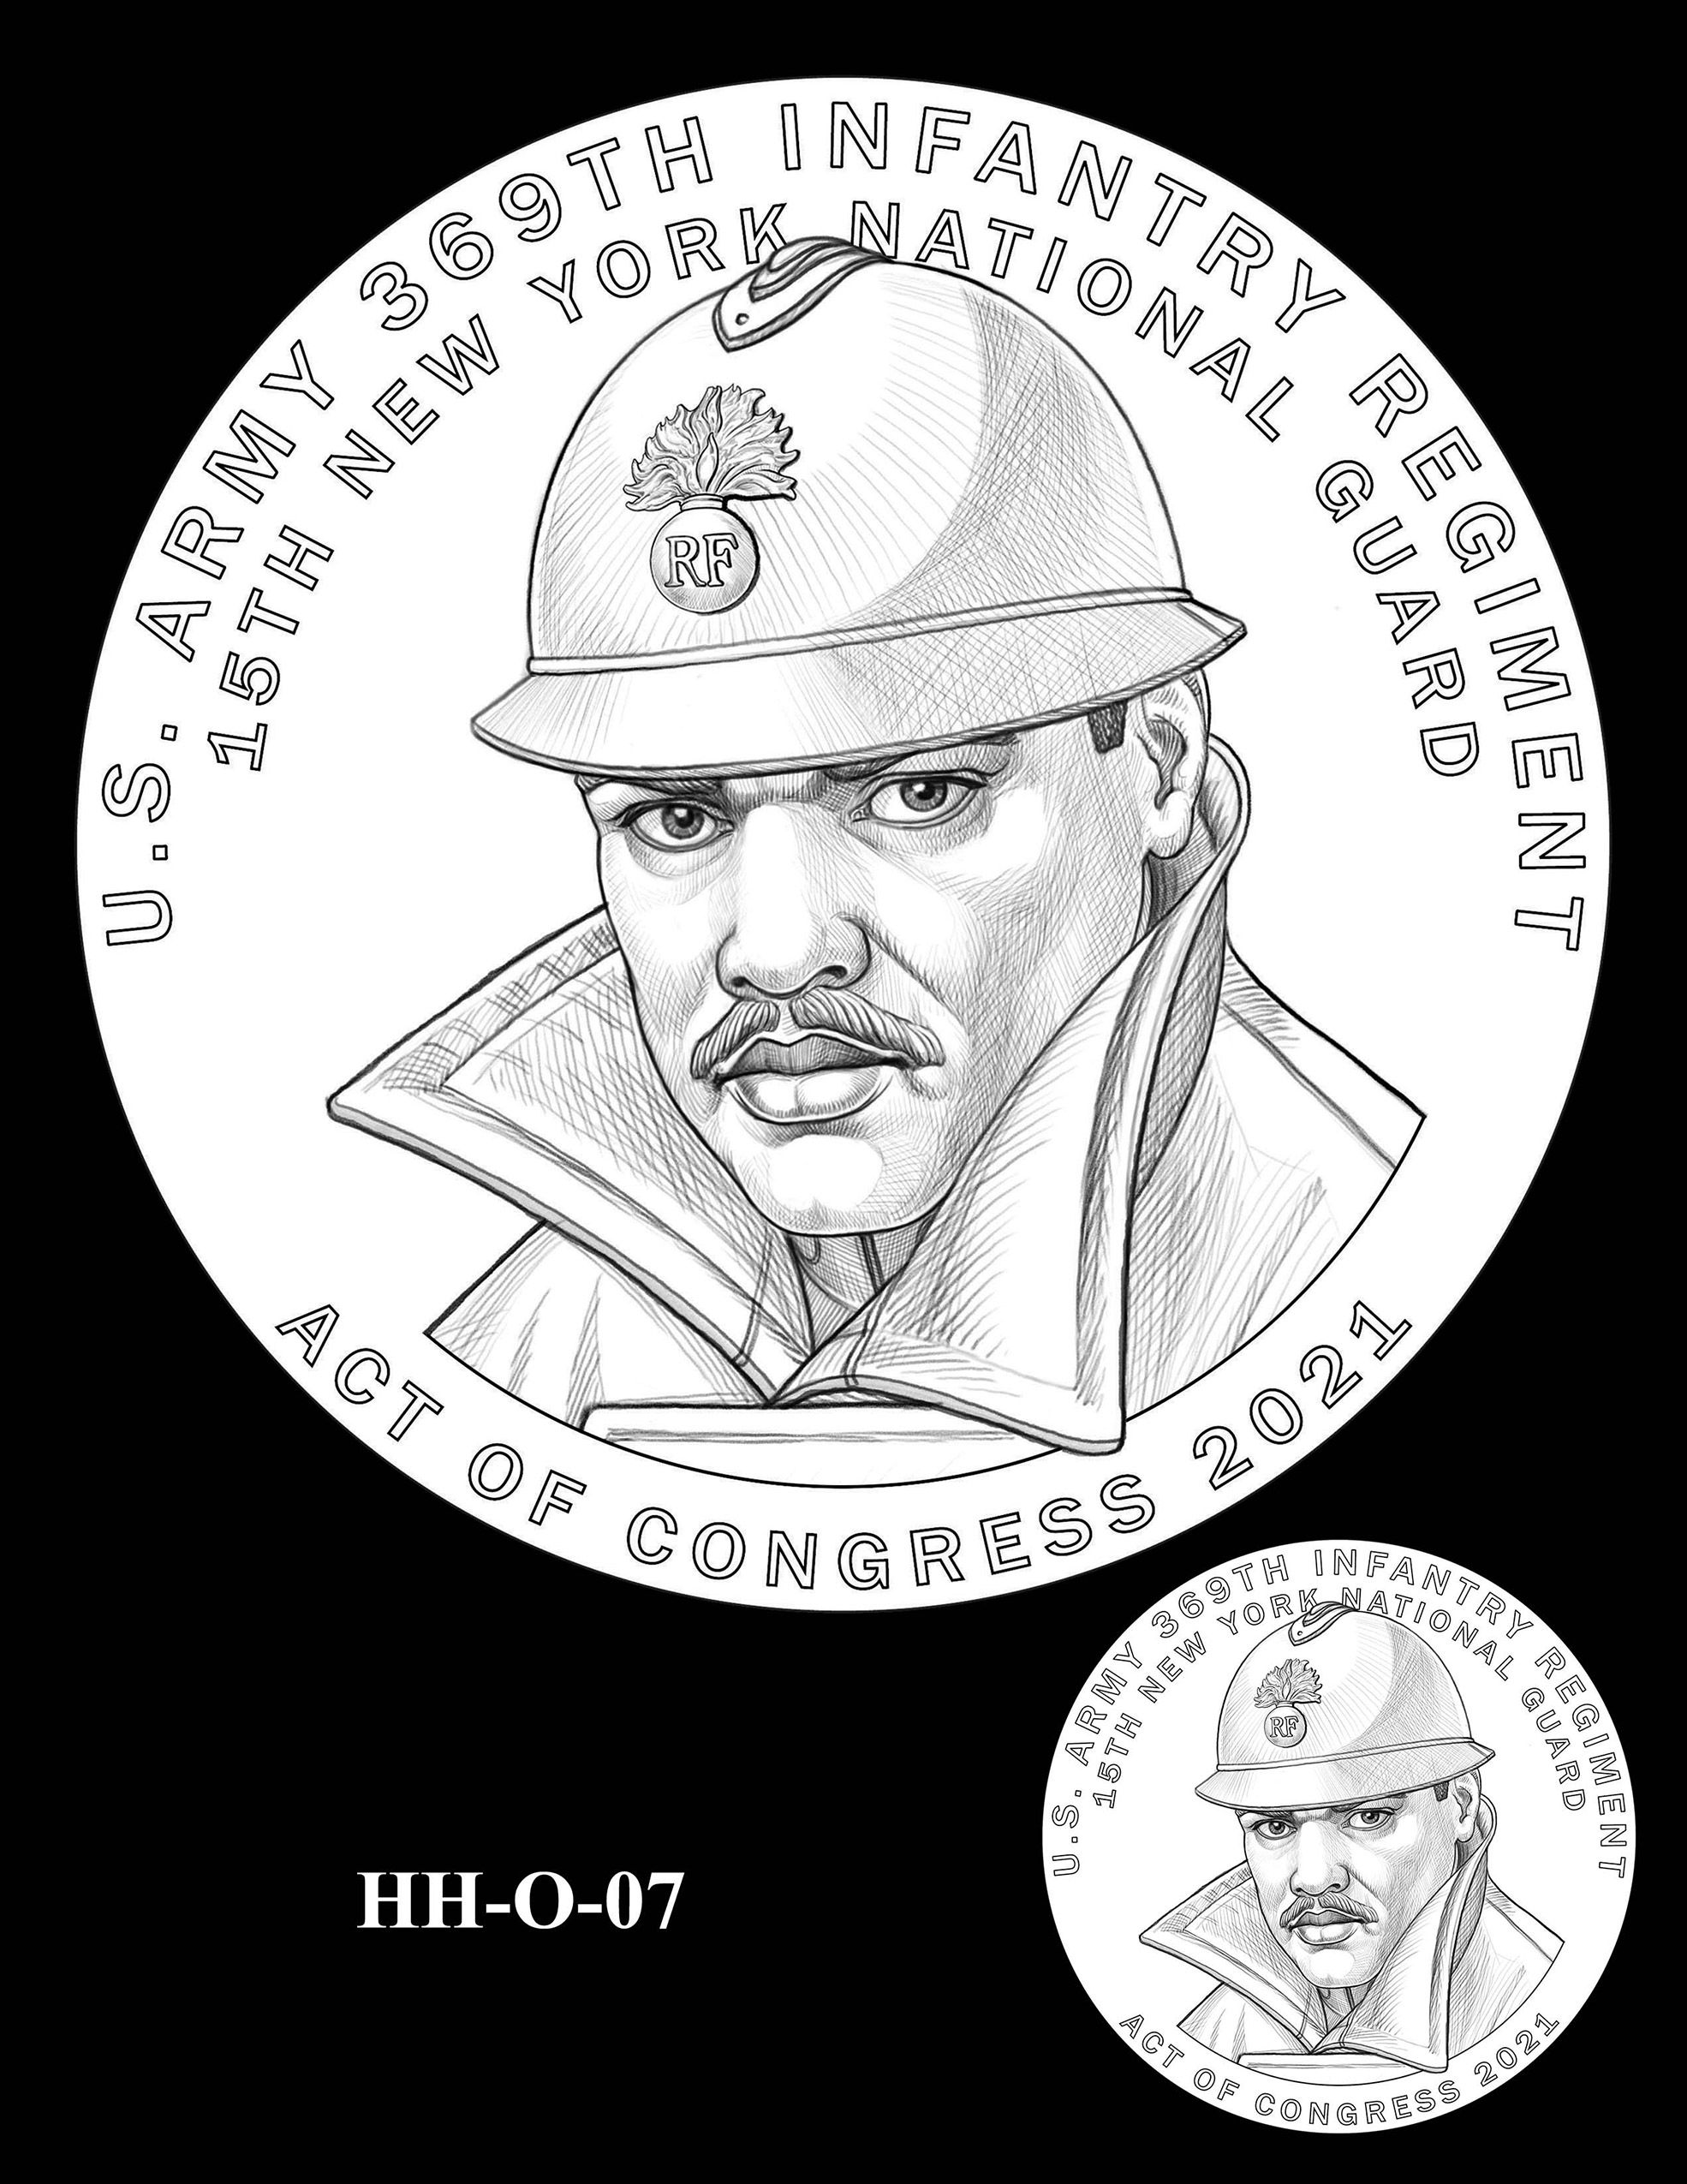 HH-O-07 -- Harlem Hellfighters Congressional Gold Medal